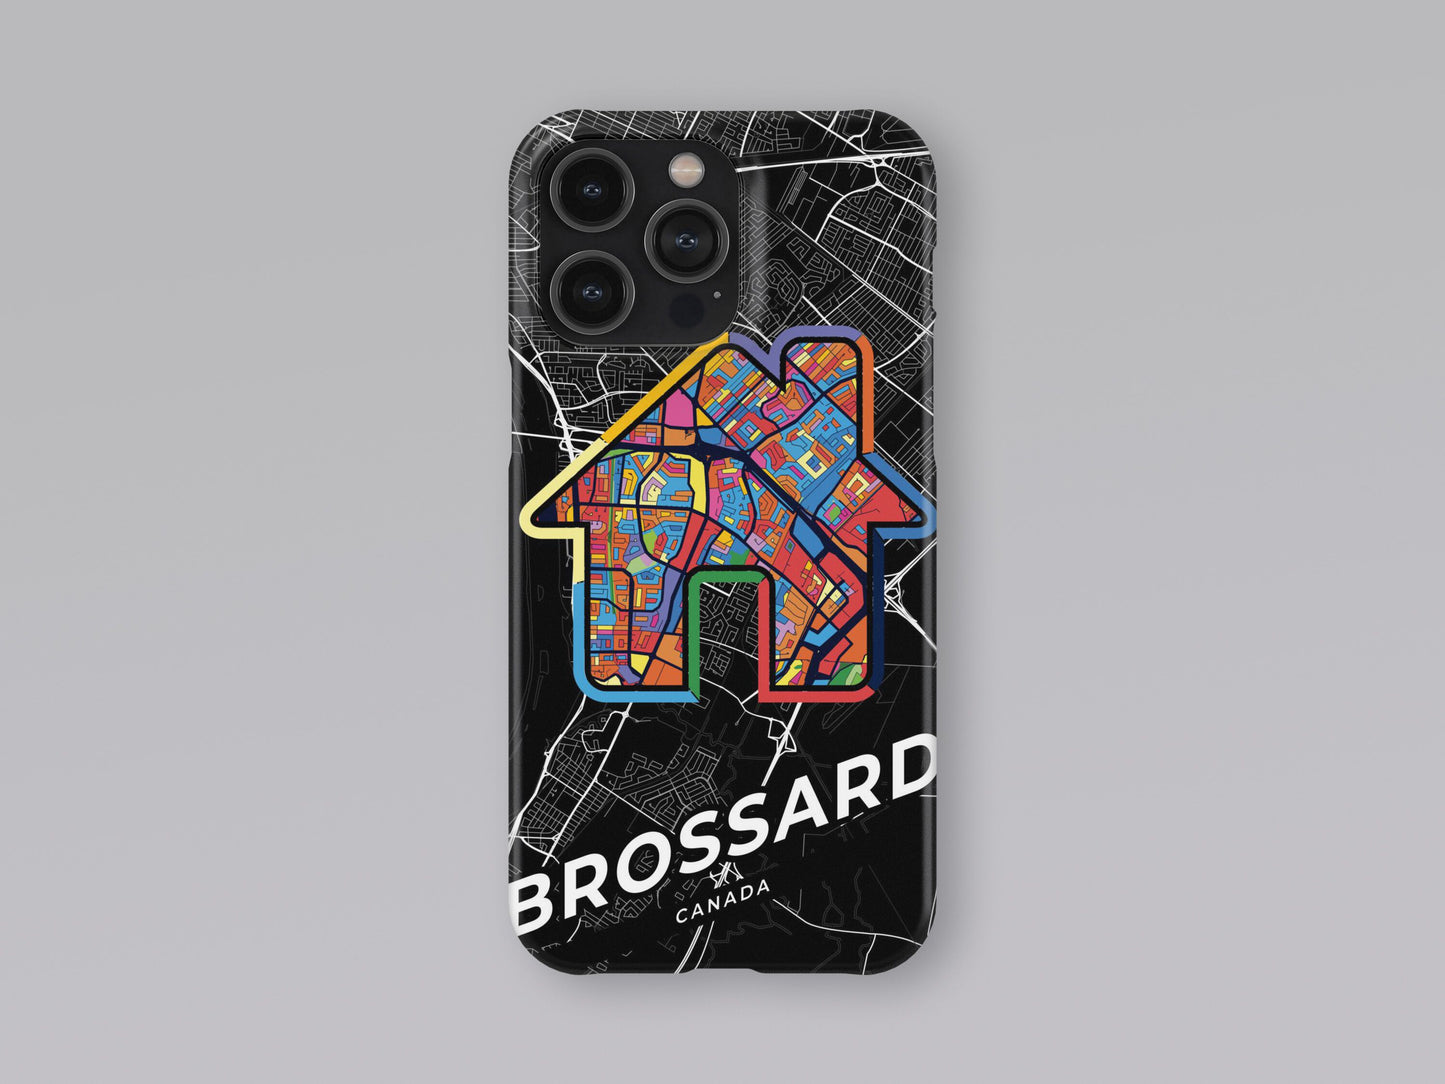 Brossard Canada slim phone case with colorful icon. Birthday, wedding or housewarming gift. Couple match cases. 3